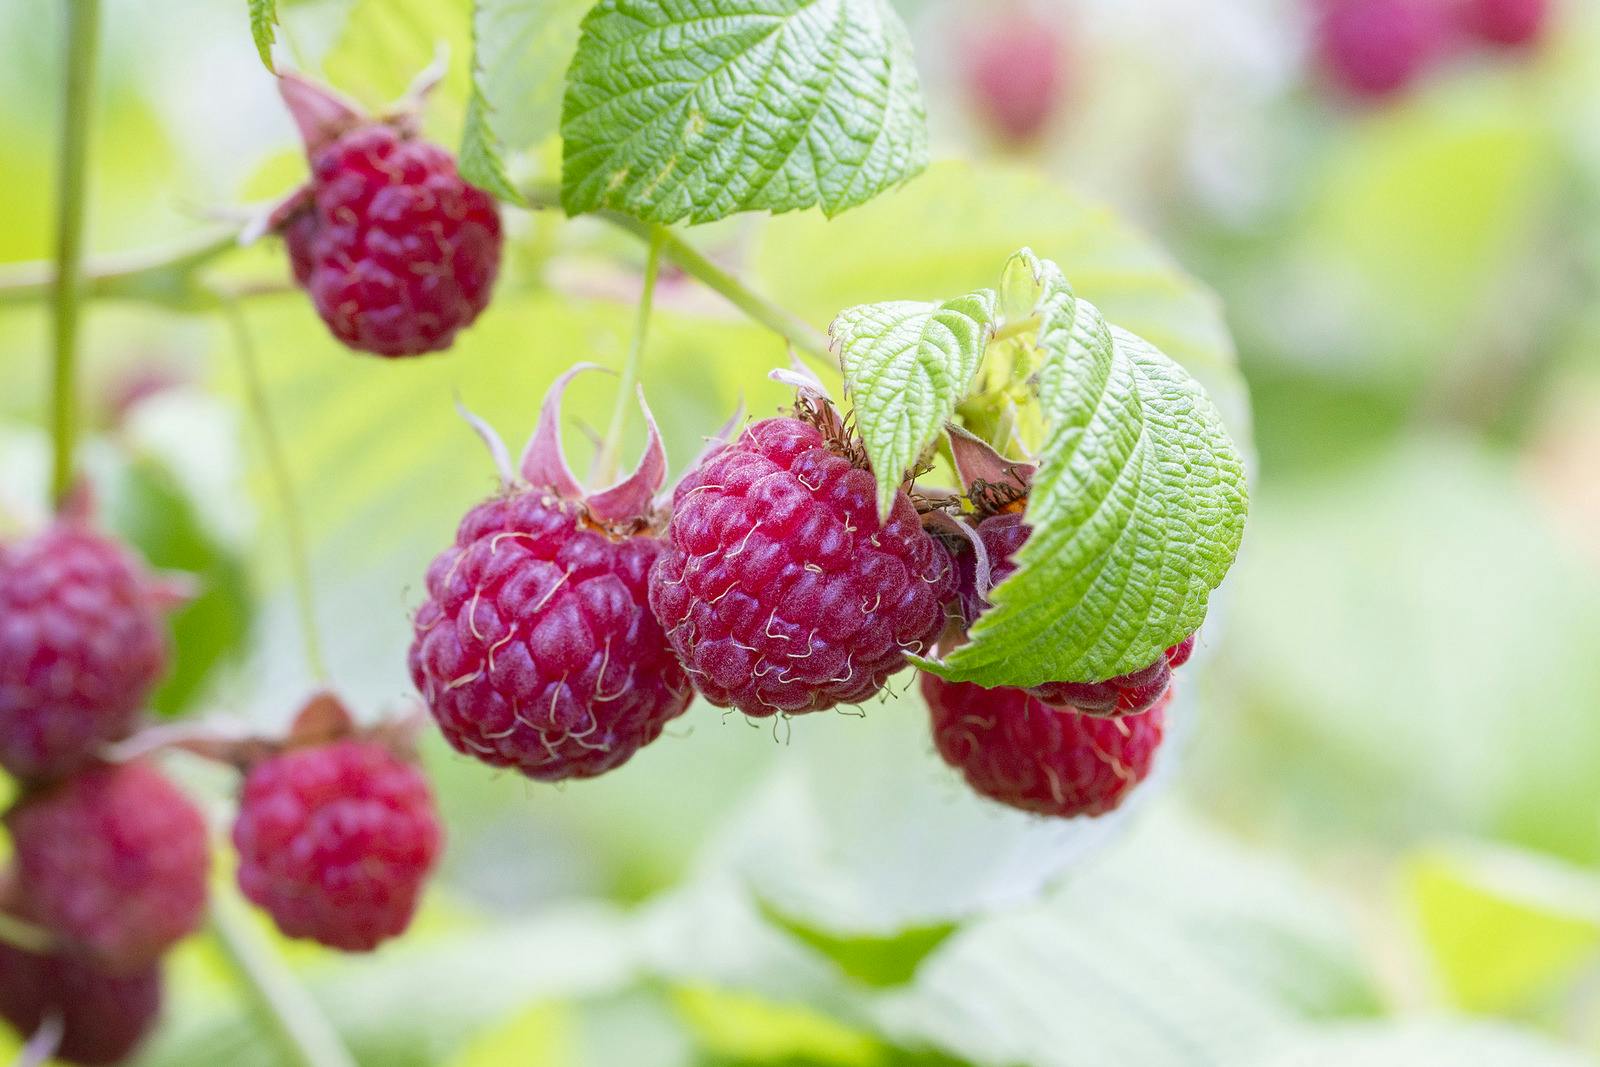 Red raspberry ripened on a branch with leaves. Ripe delicious red raspberry berries in nature. Raspberry branch with berries and leaves natural foliage background
